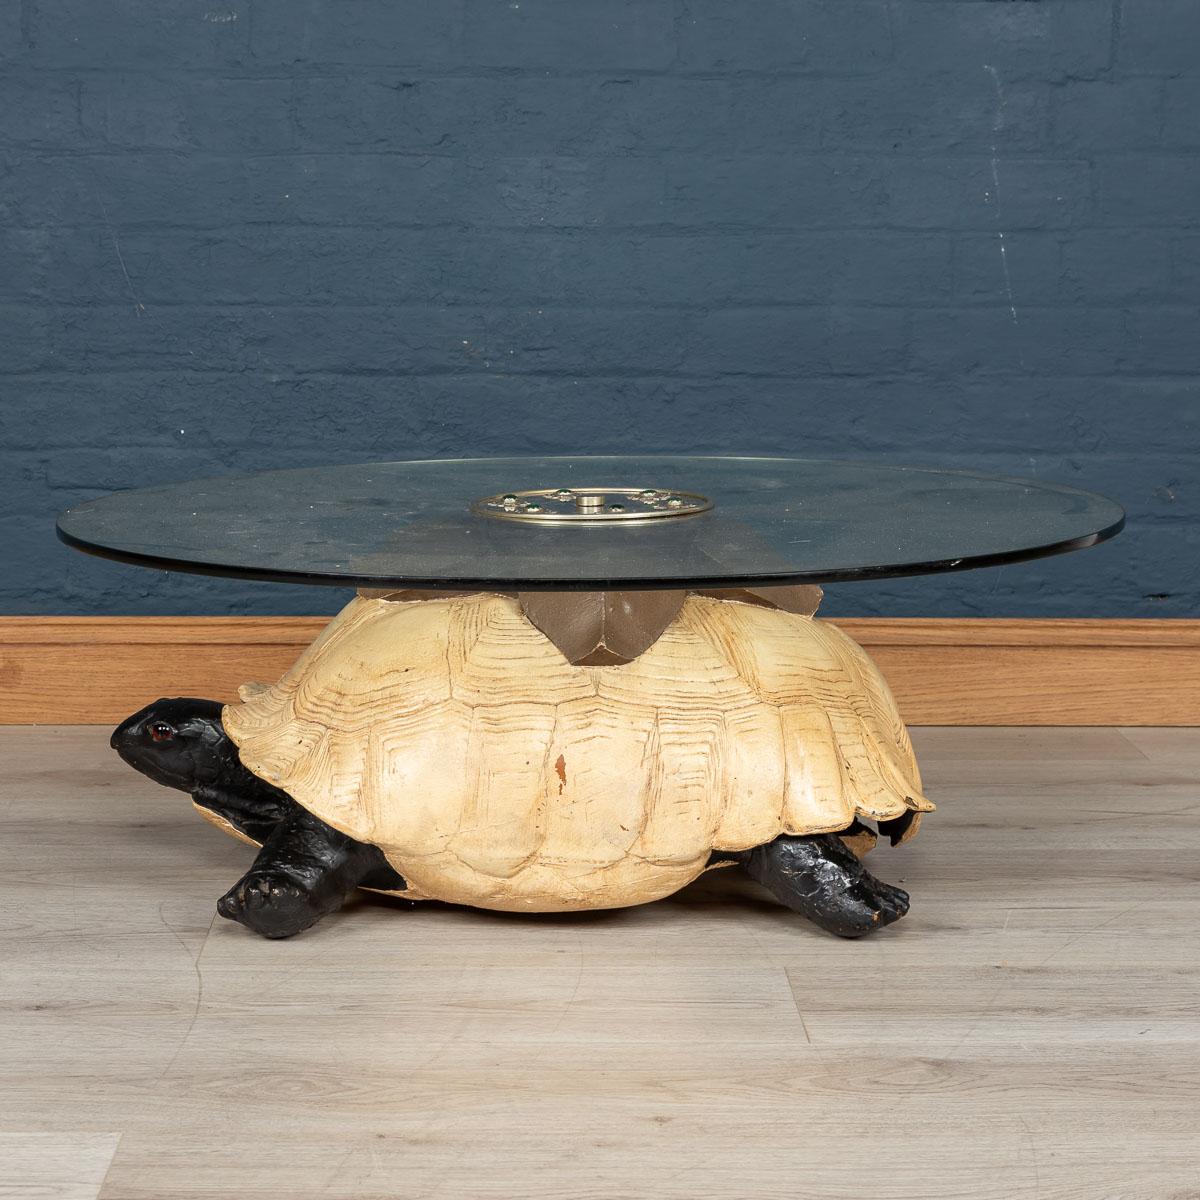 A coffee table by Anthony Redmile, London, circa 1970. The base of the table fashioned from composite painted turtle, the central circular plaque inlaid with hardstone cabochons signed Redmile, London to the centre. Anthony Redmile burst into the